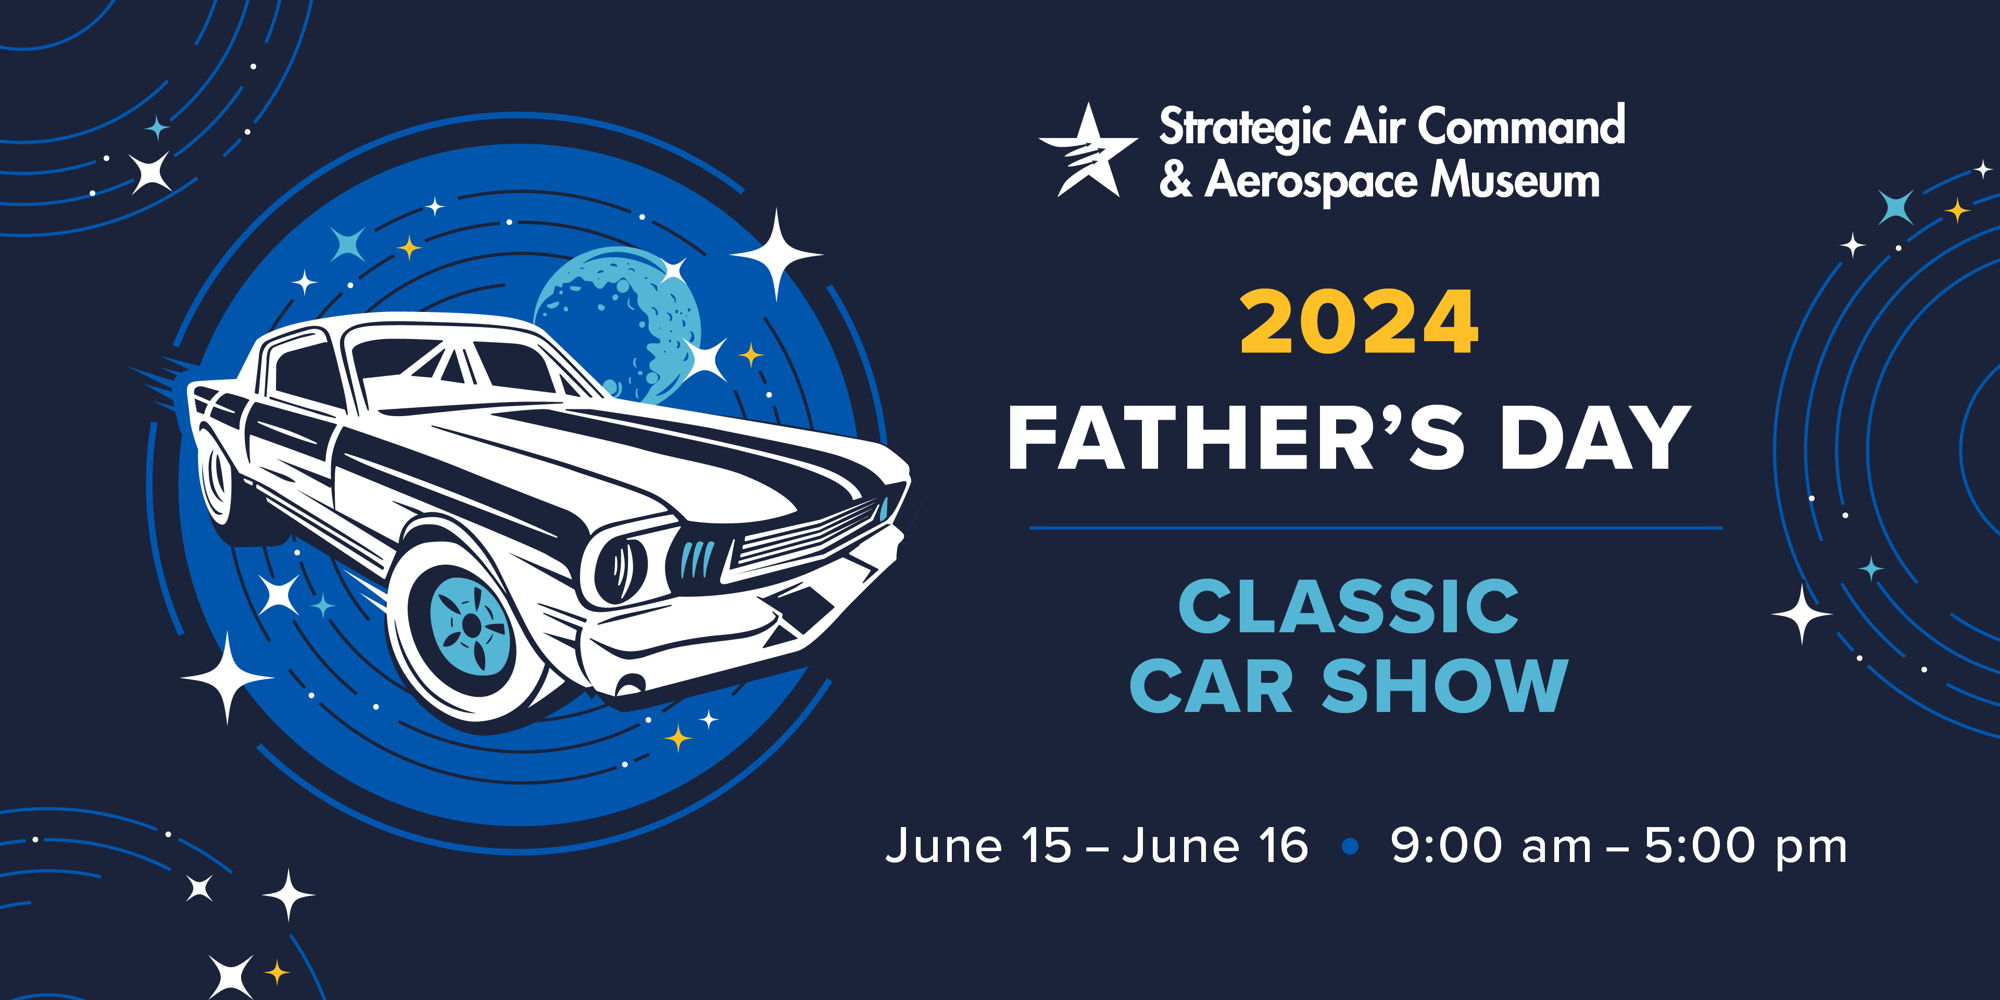 2024 Father's Day Classic Car Show promotional image